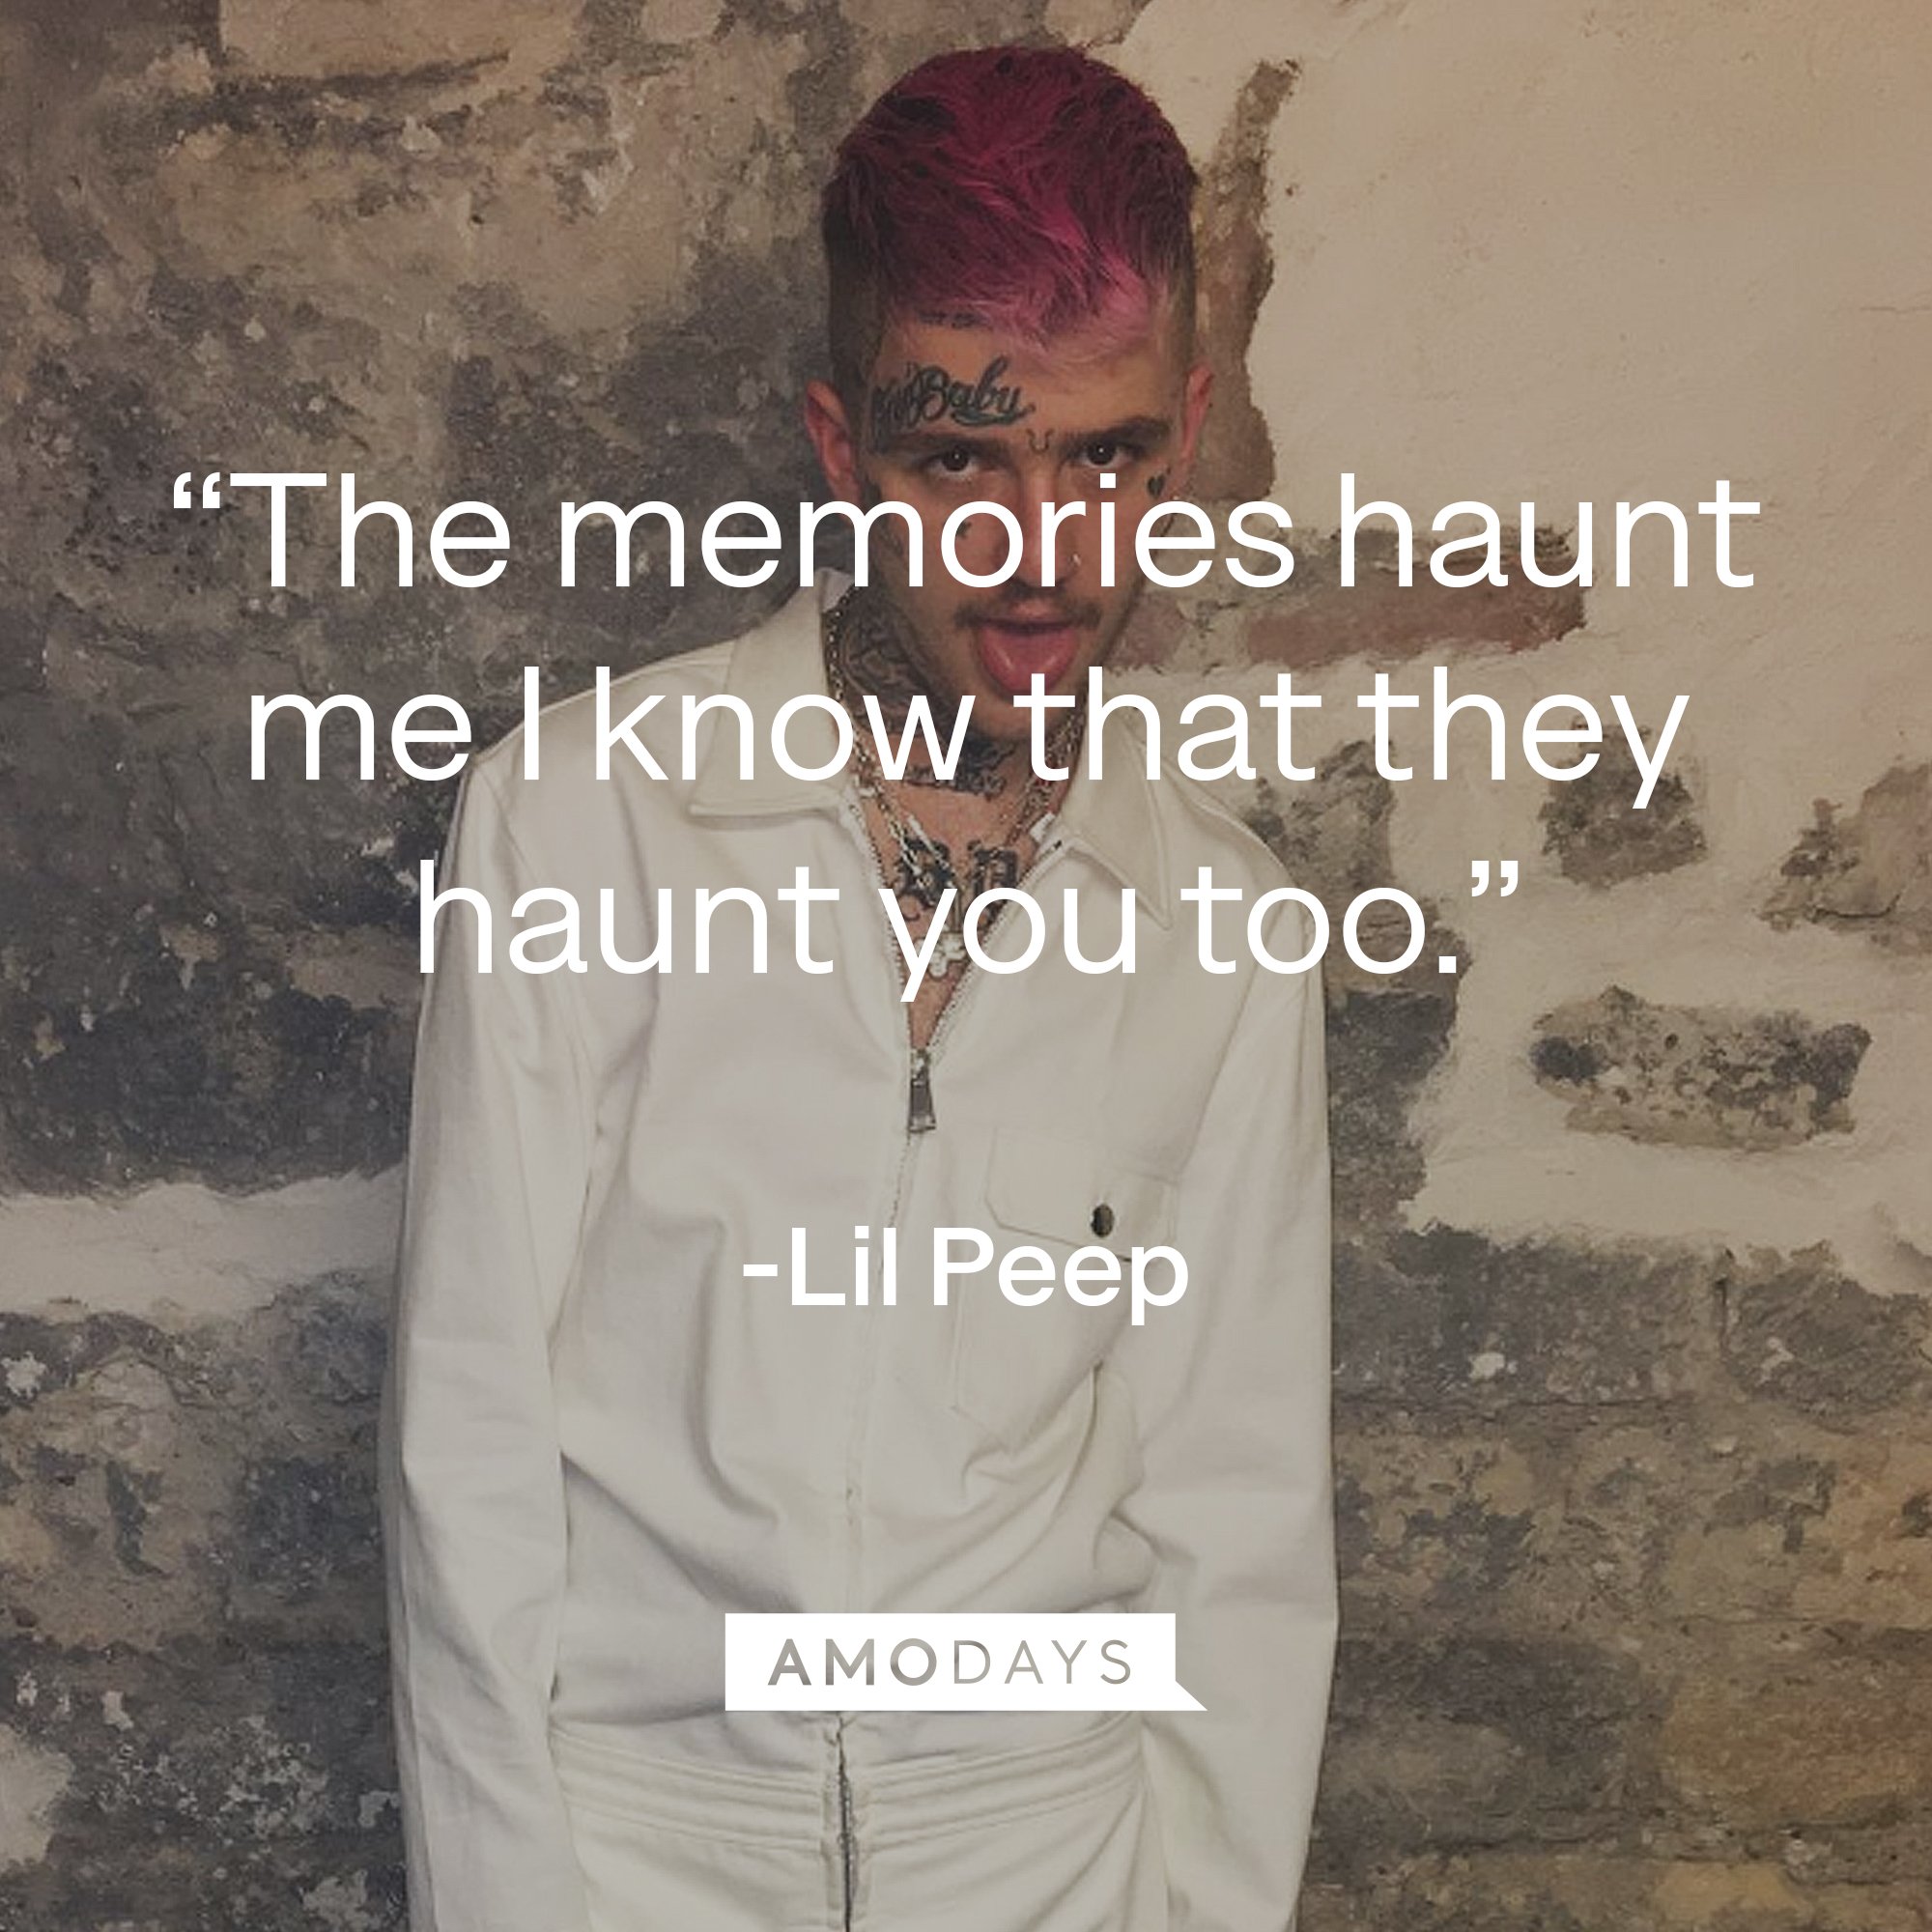 Lil Peep's quote: “The memories haunt me I know that they haunt you too.” | Image: AmoDays